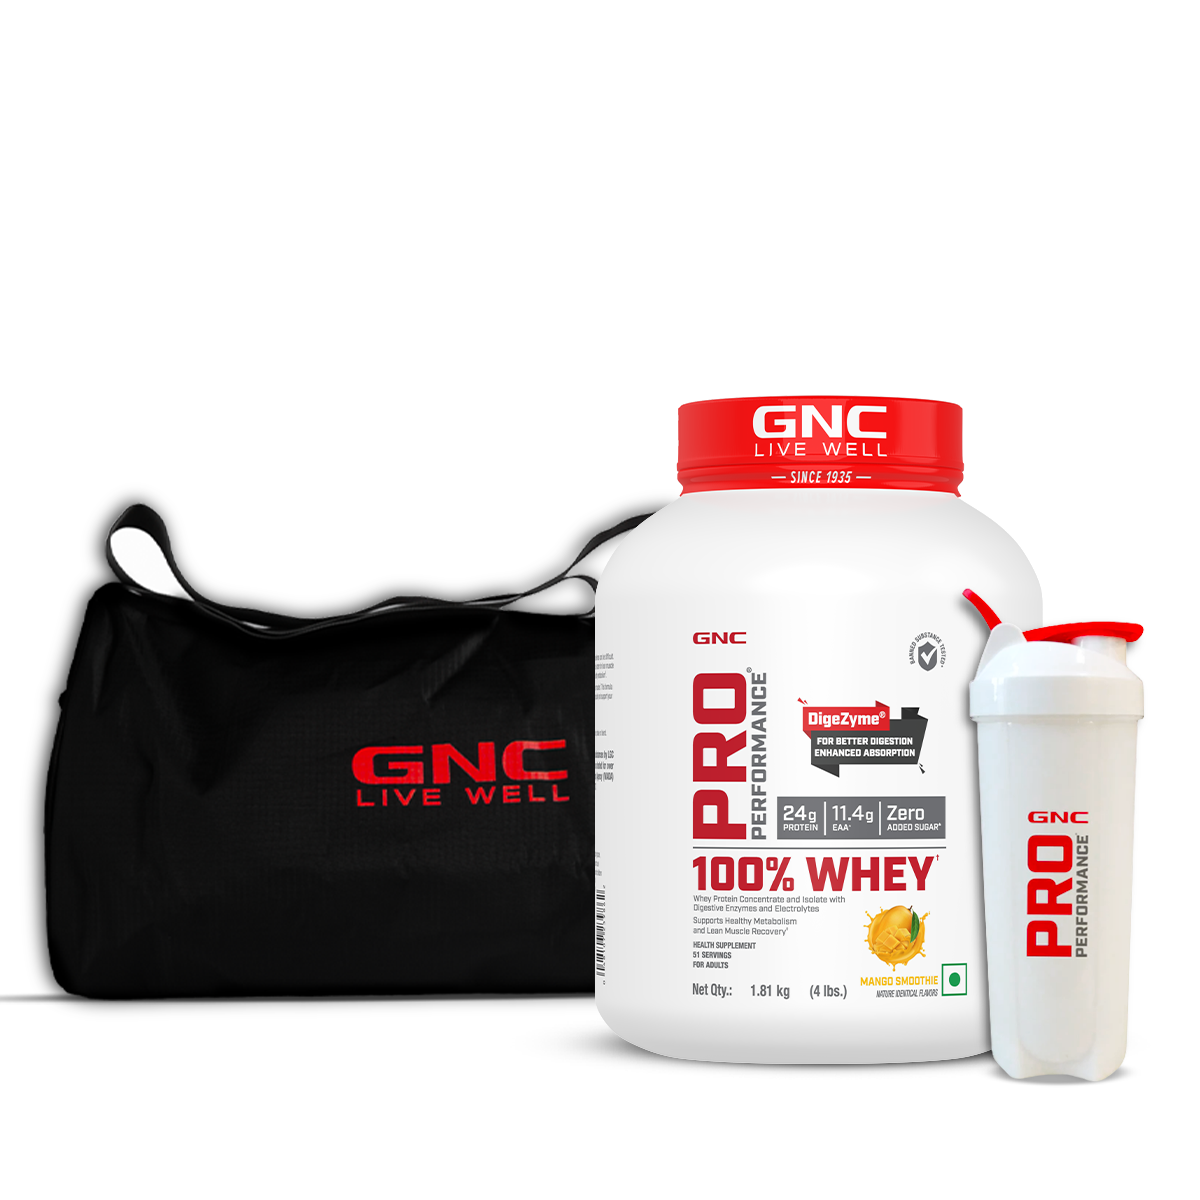 Complete Gym Set - 100% Whey Protein with Gym Bag & Shaker | Faster Recovery & Lean Muscle Gains | DigeZyme® For Easy Digestion